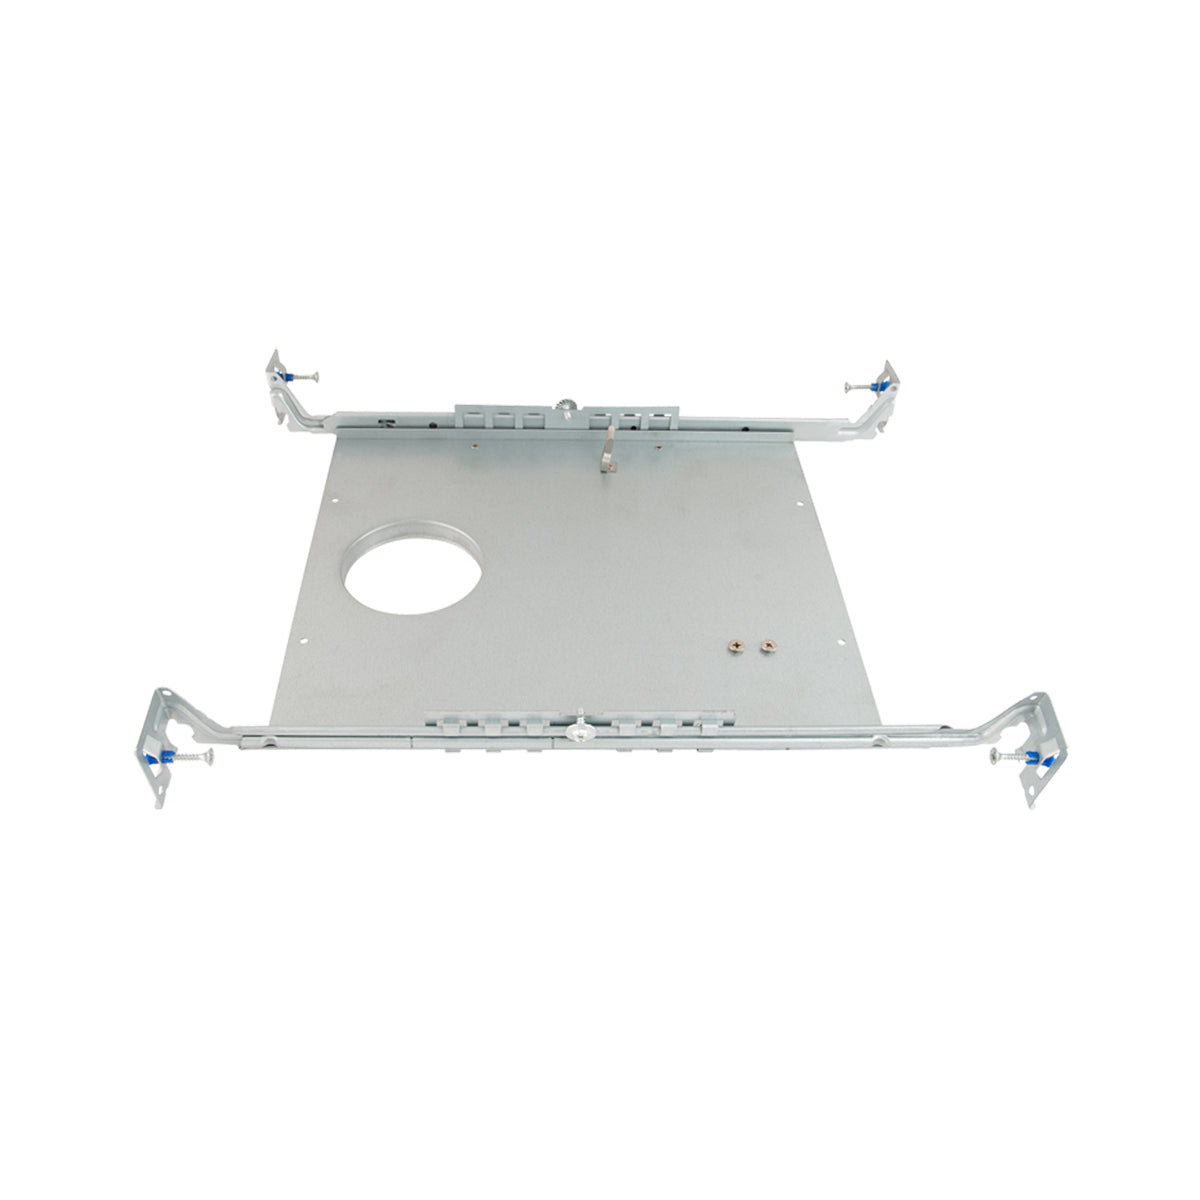 W.A.C. Canada - Downlight Frame In Kit - Ion- Union Lighting Luminaires Decor